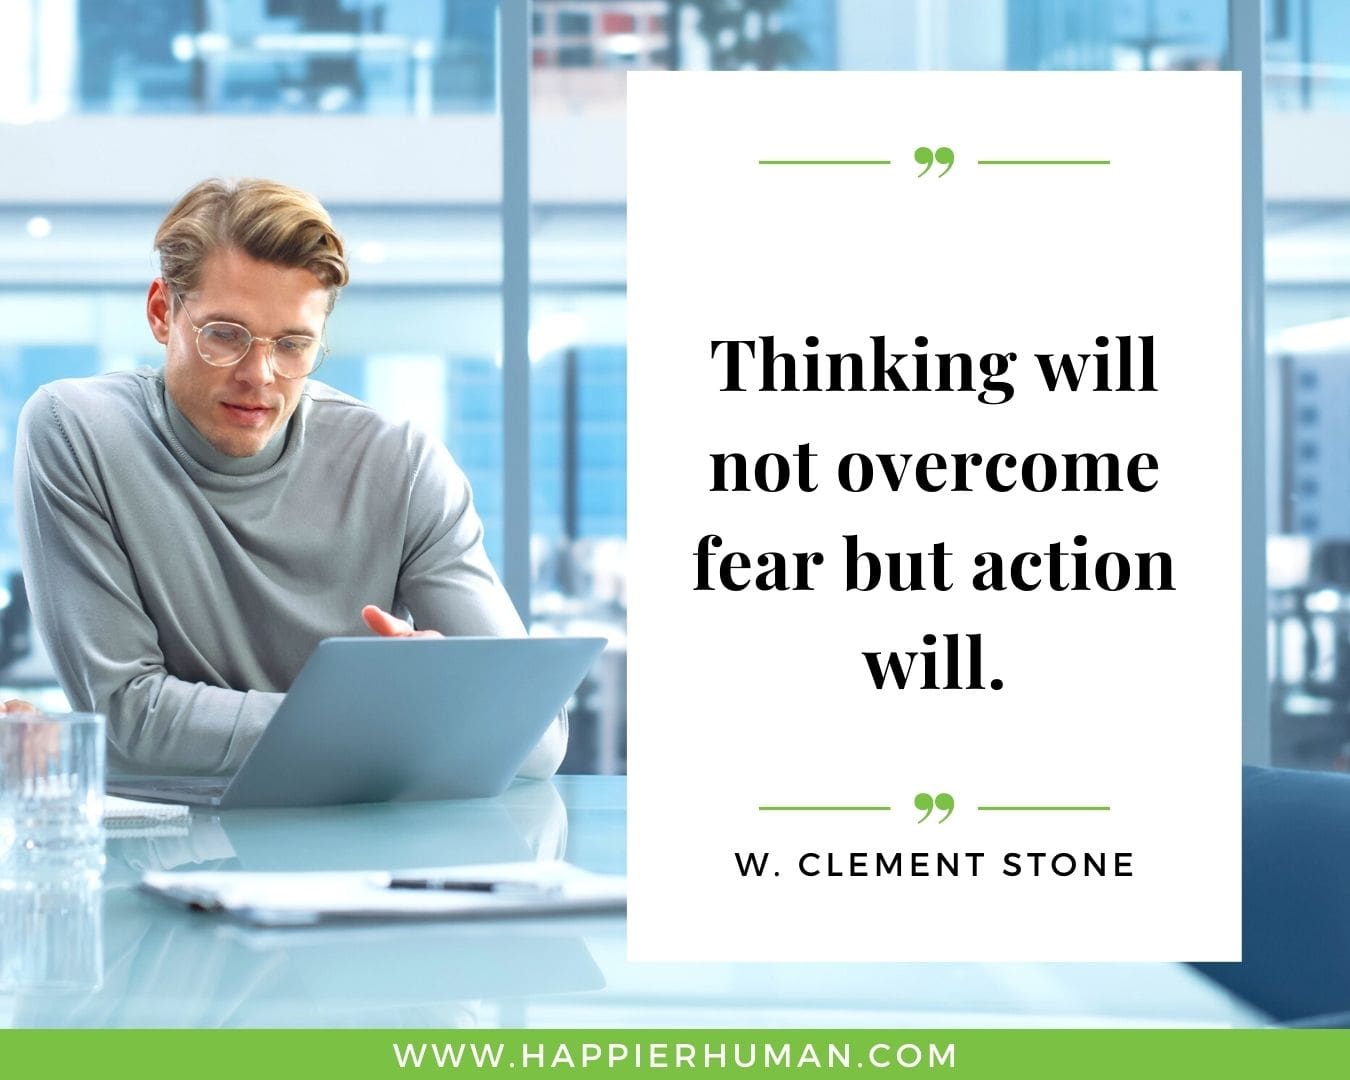 Overthinking Quotes - "Thinking will not overcome fear but action will." - W. Clement Stone